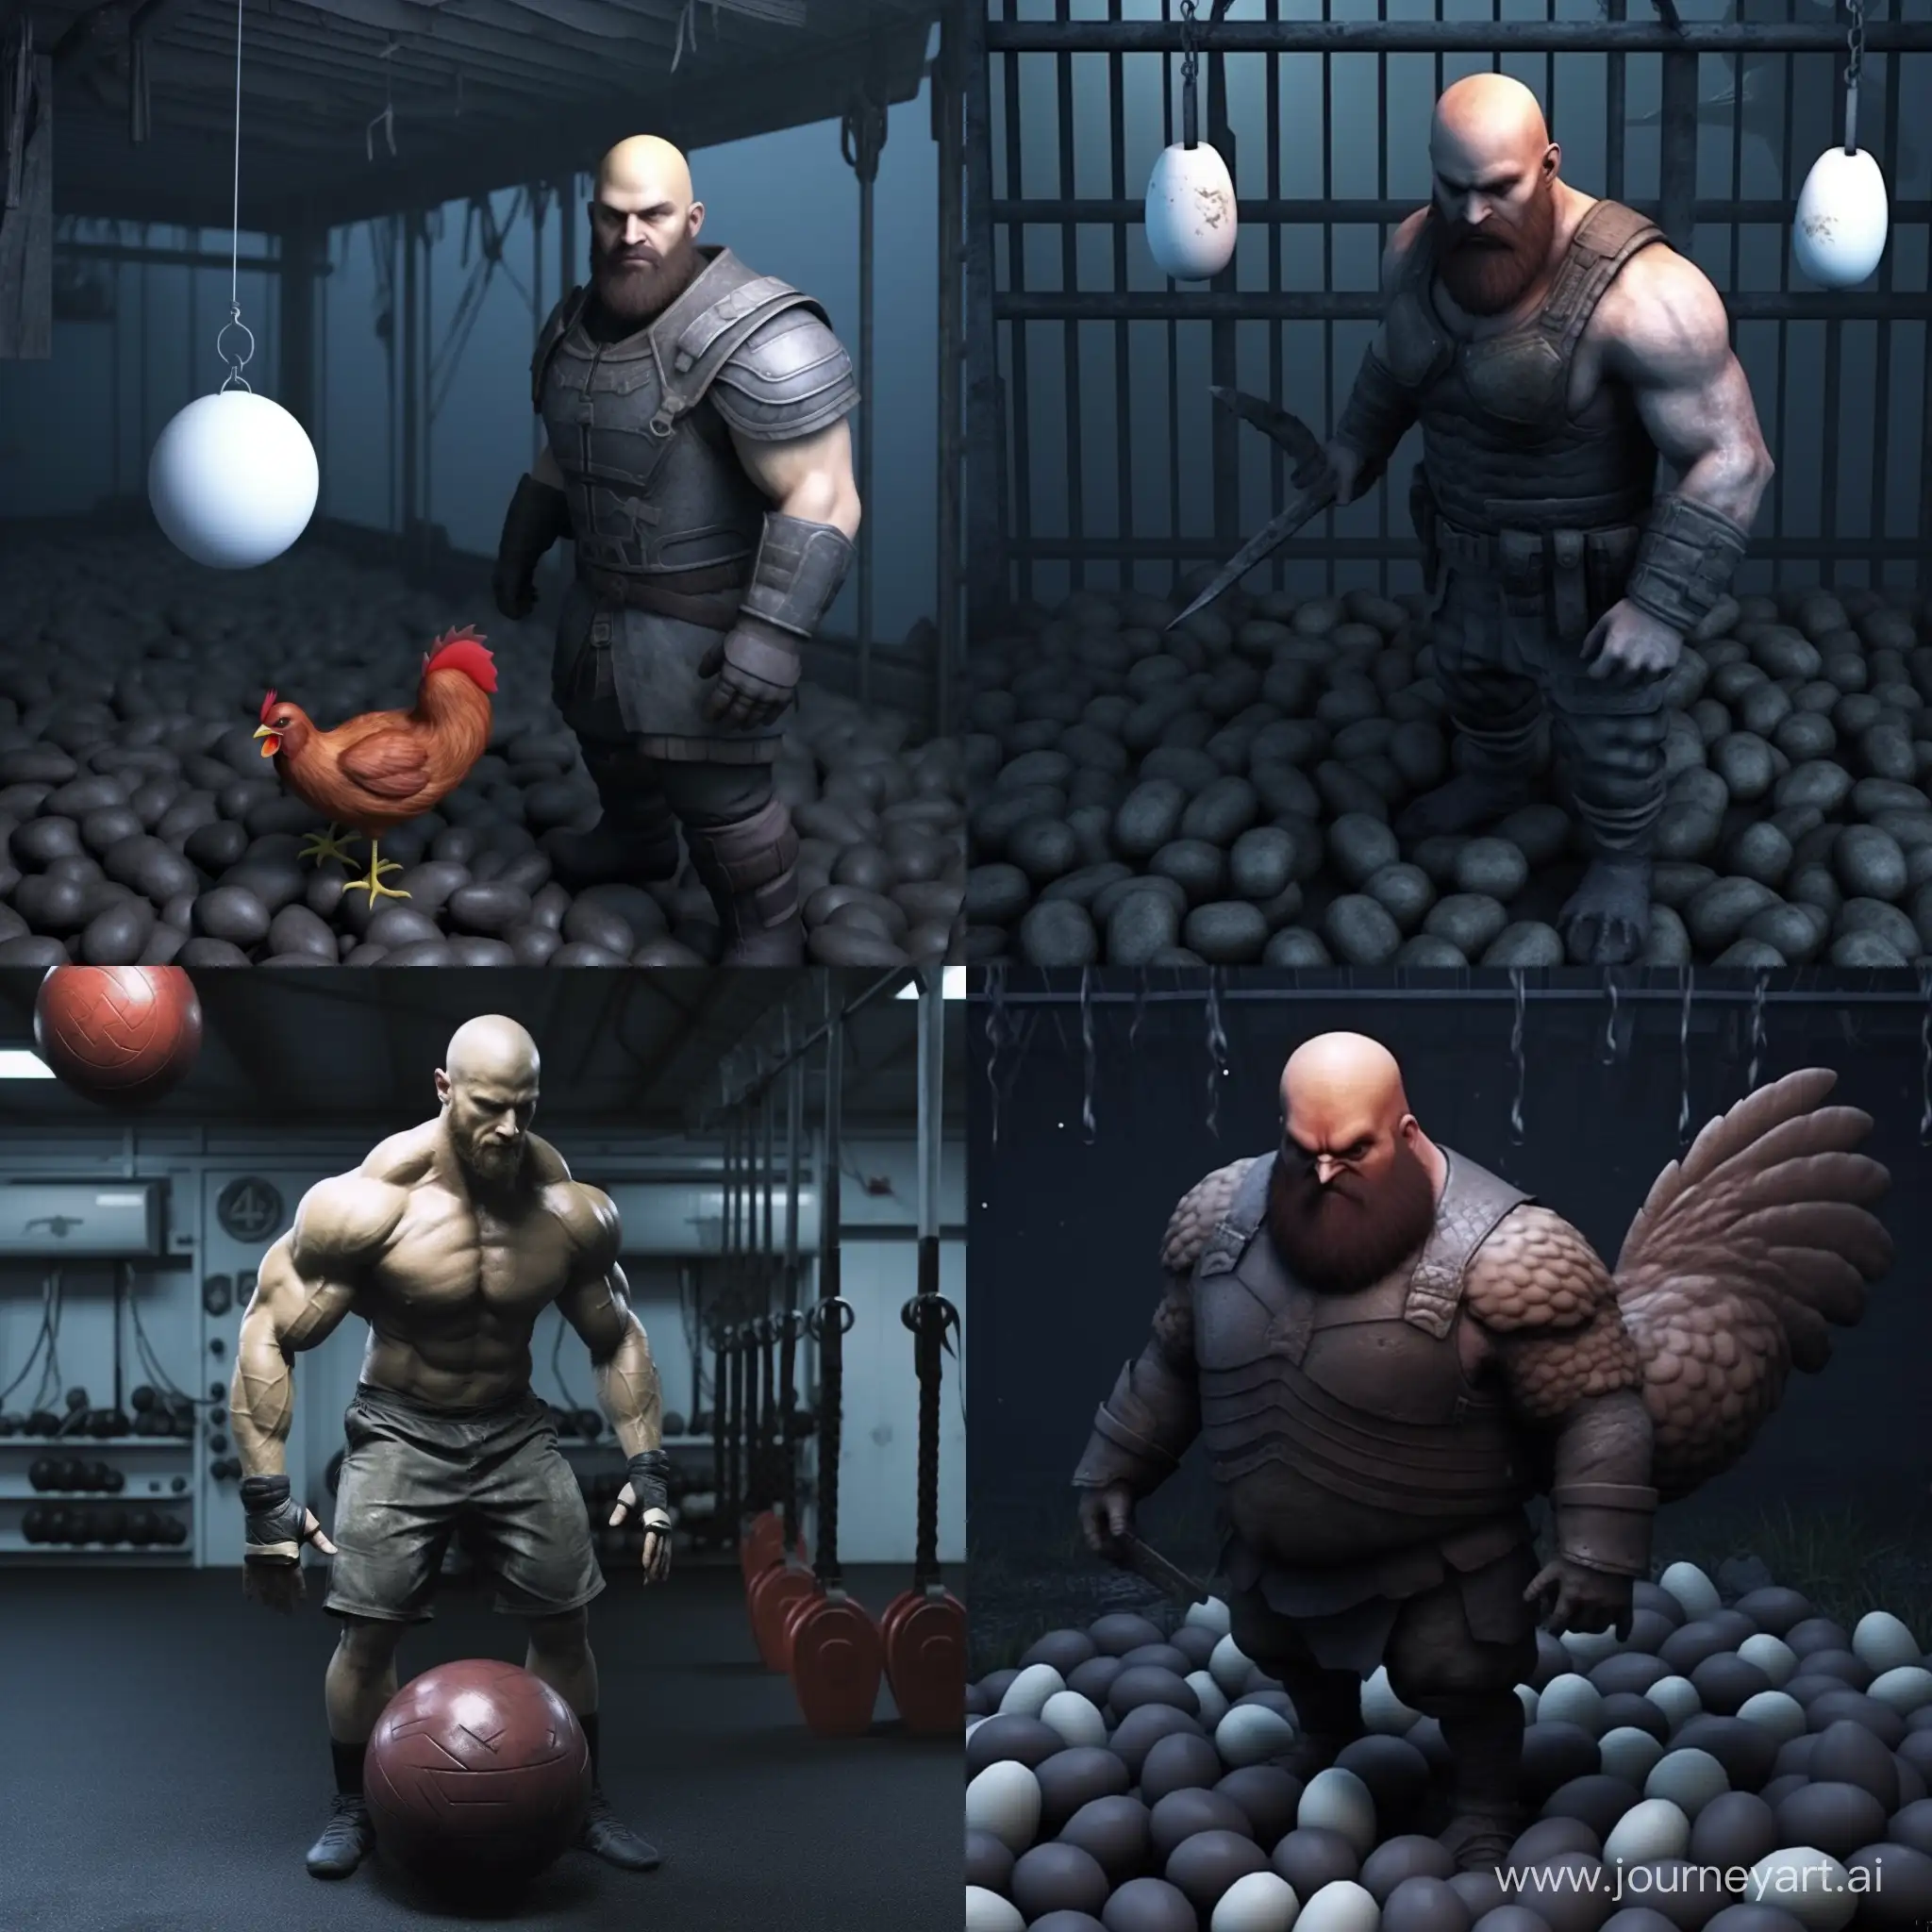 Artyom pumps his chicken eggs in the gym